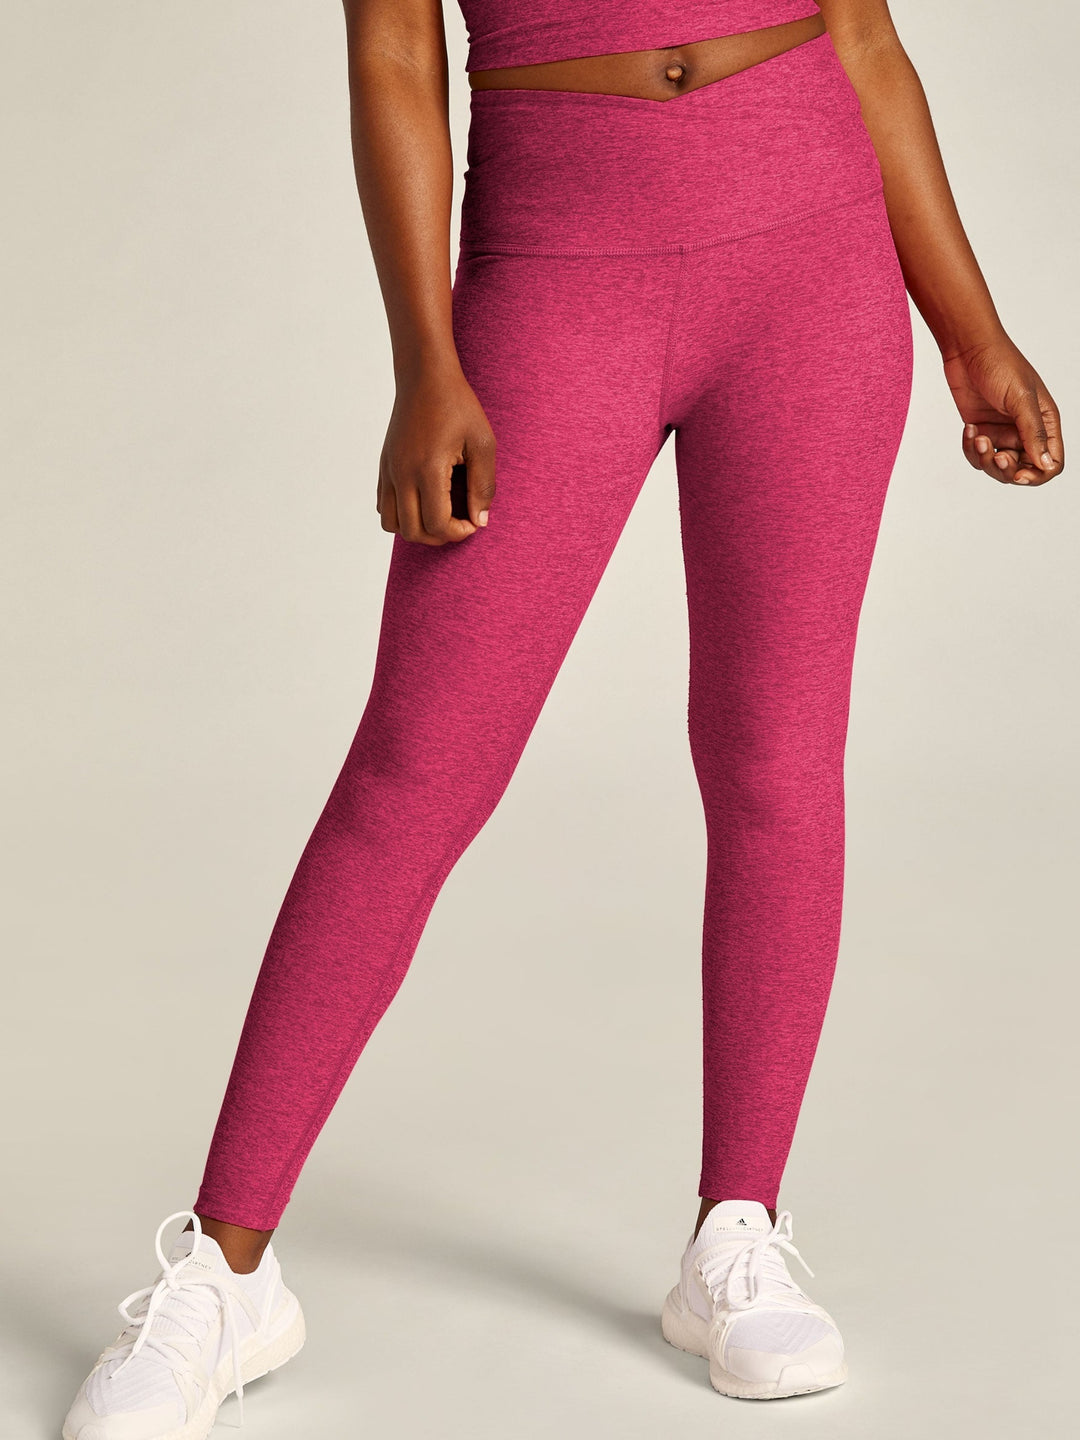 NEW - Beyond Yoga Spacedye At Your Leisure High Waisted Legging in